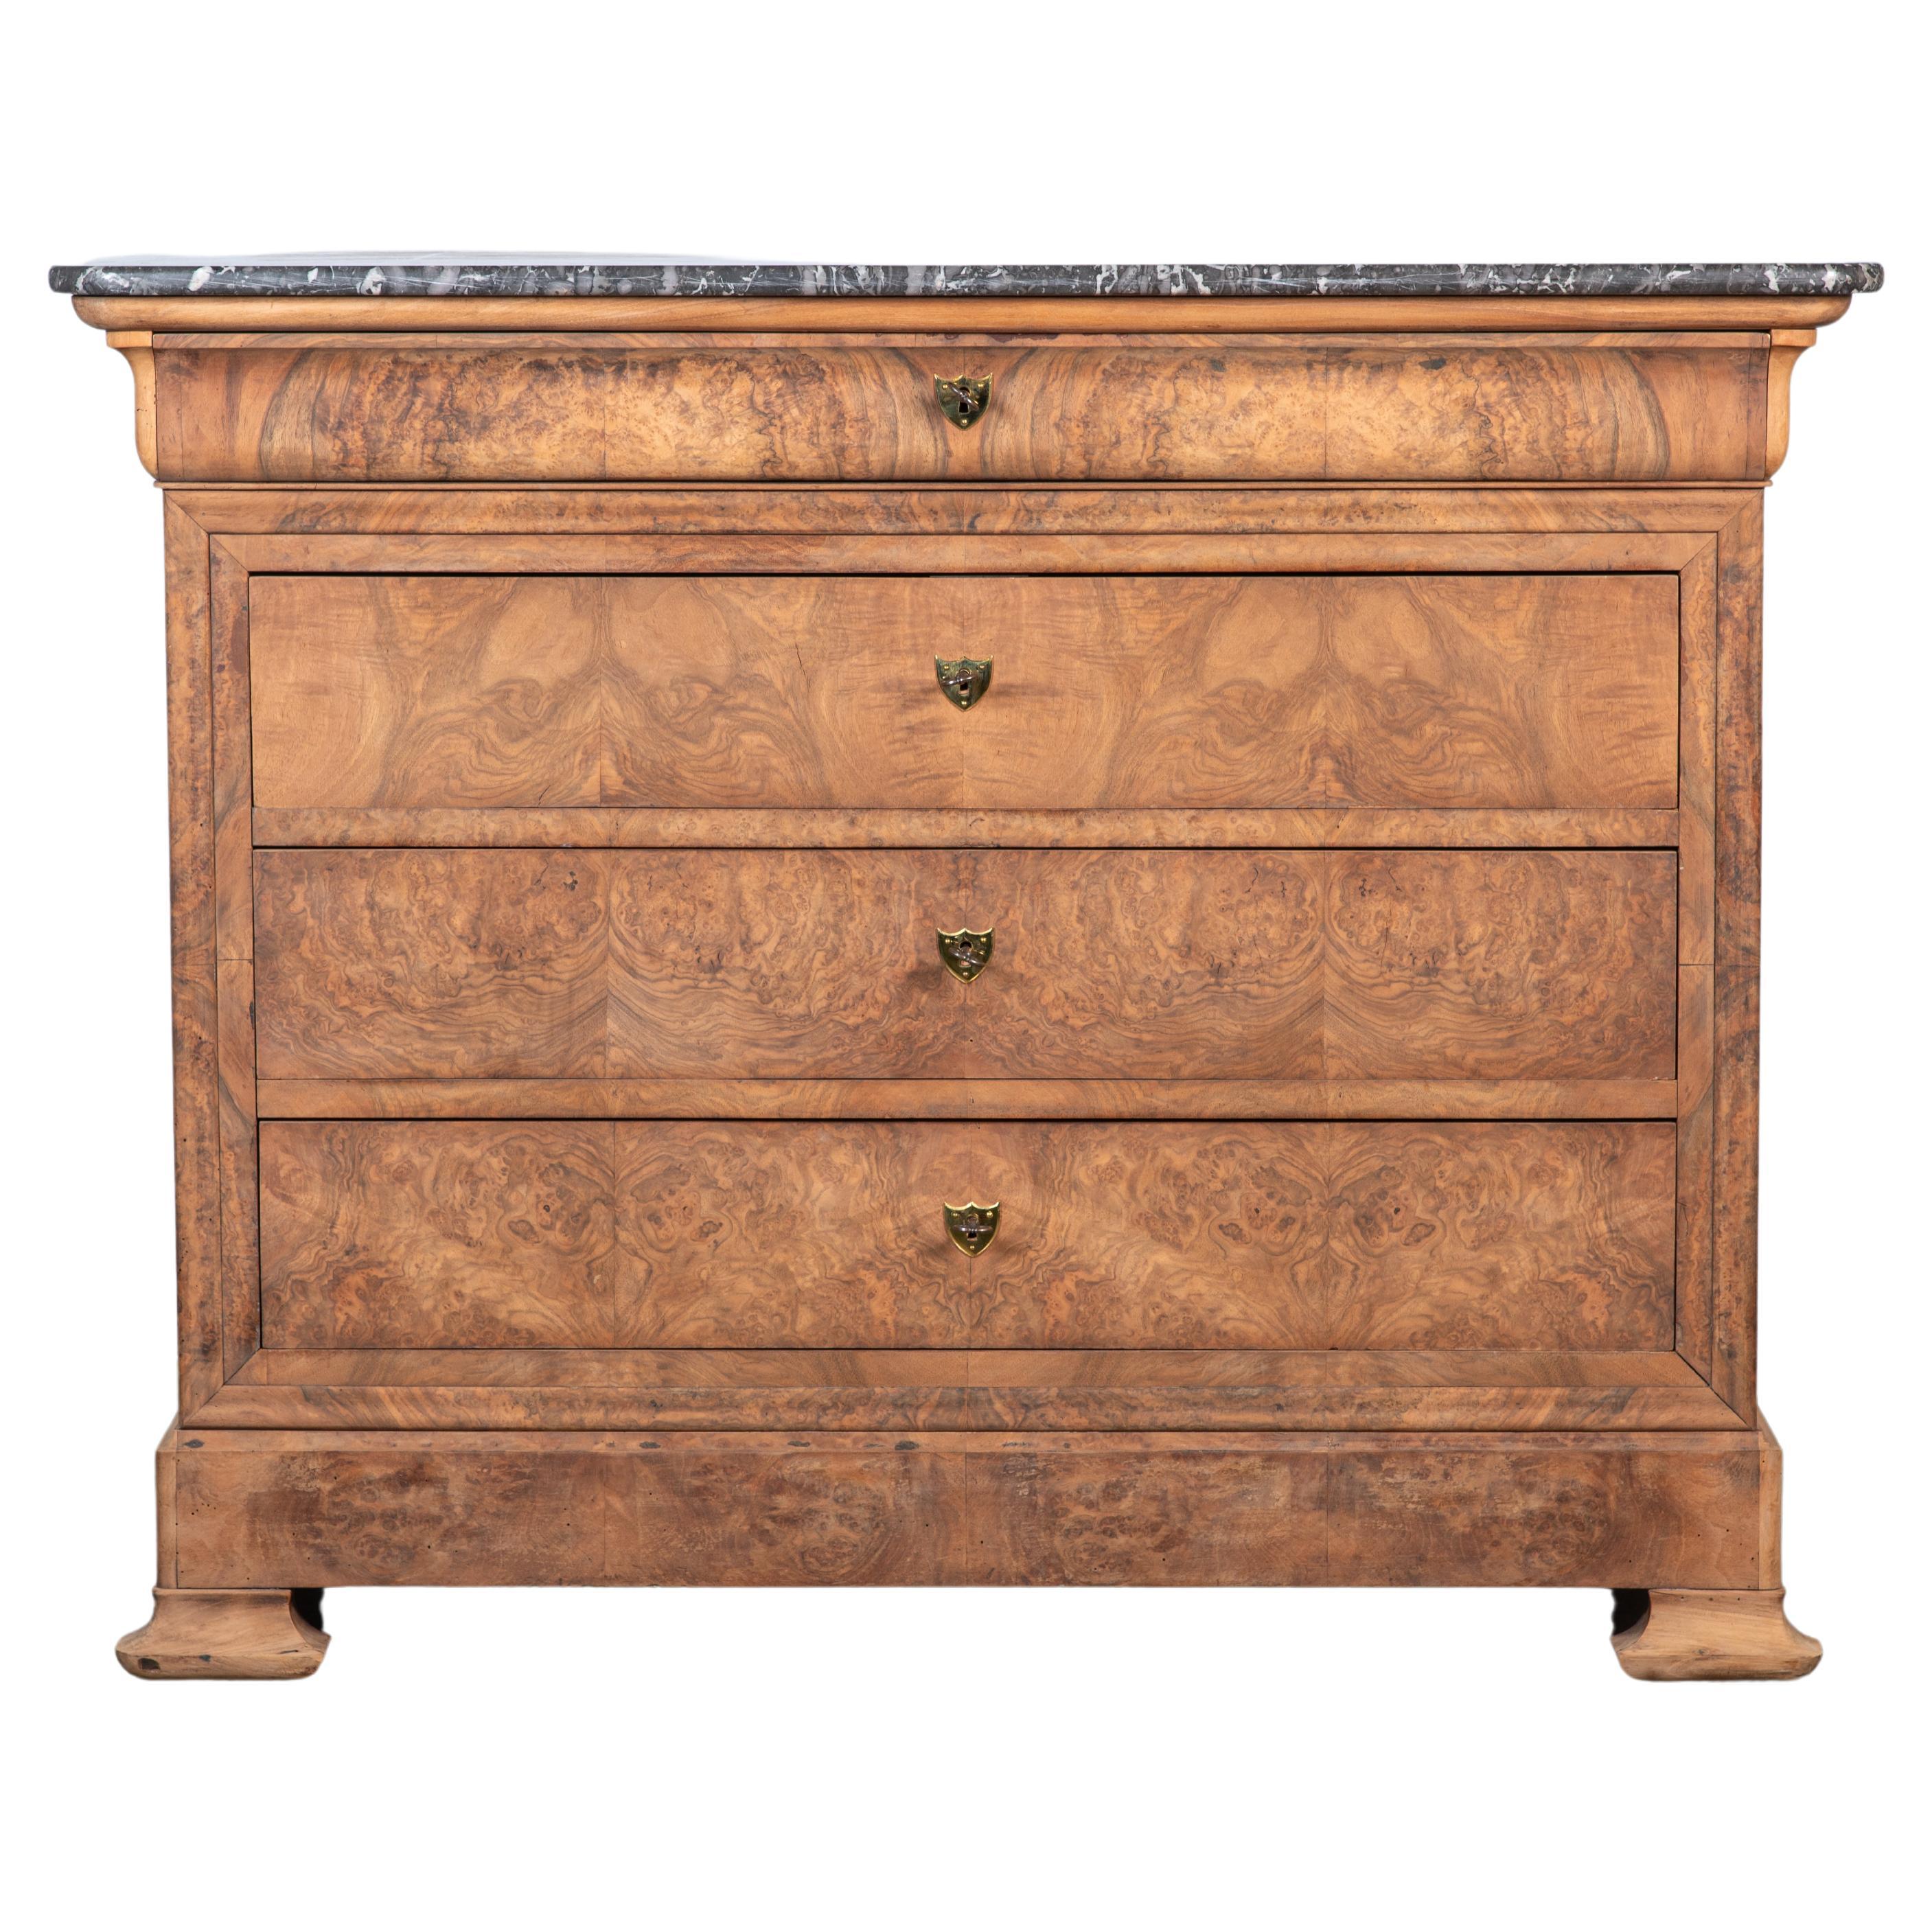 19th Century French Louis Philippe Burl Walnut Veneer Commode For Sale